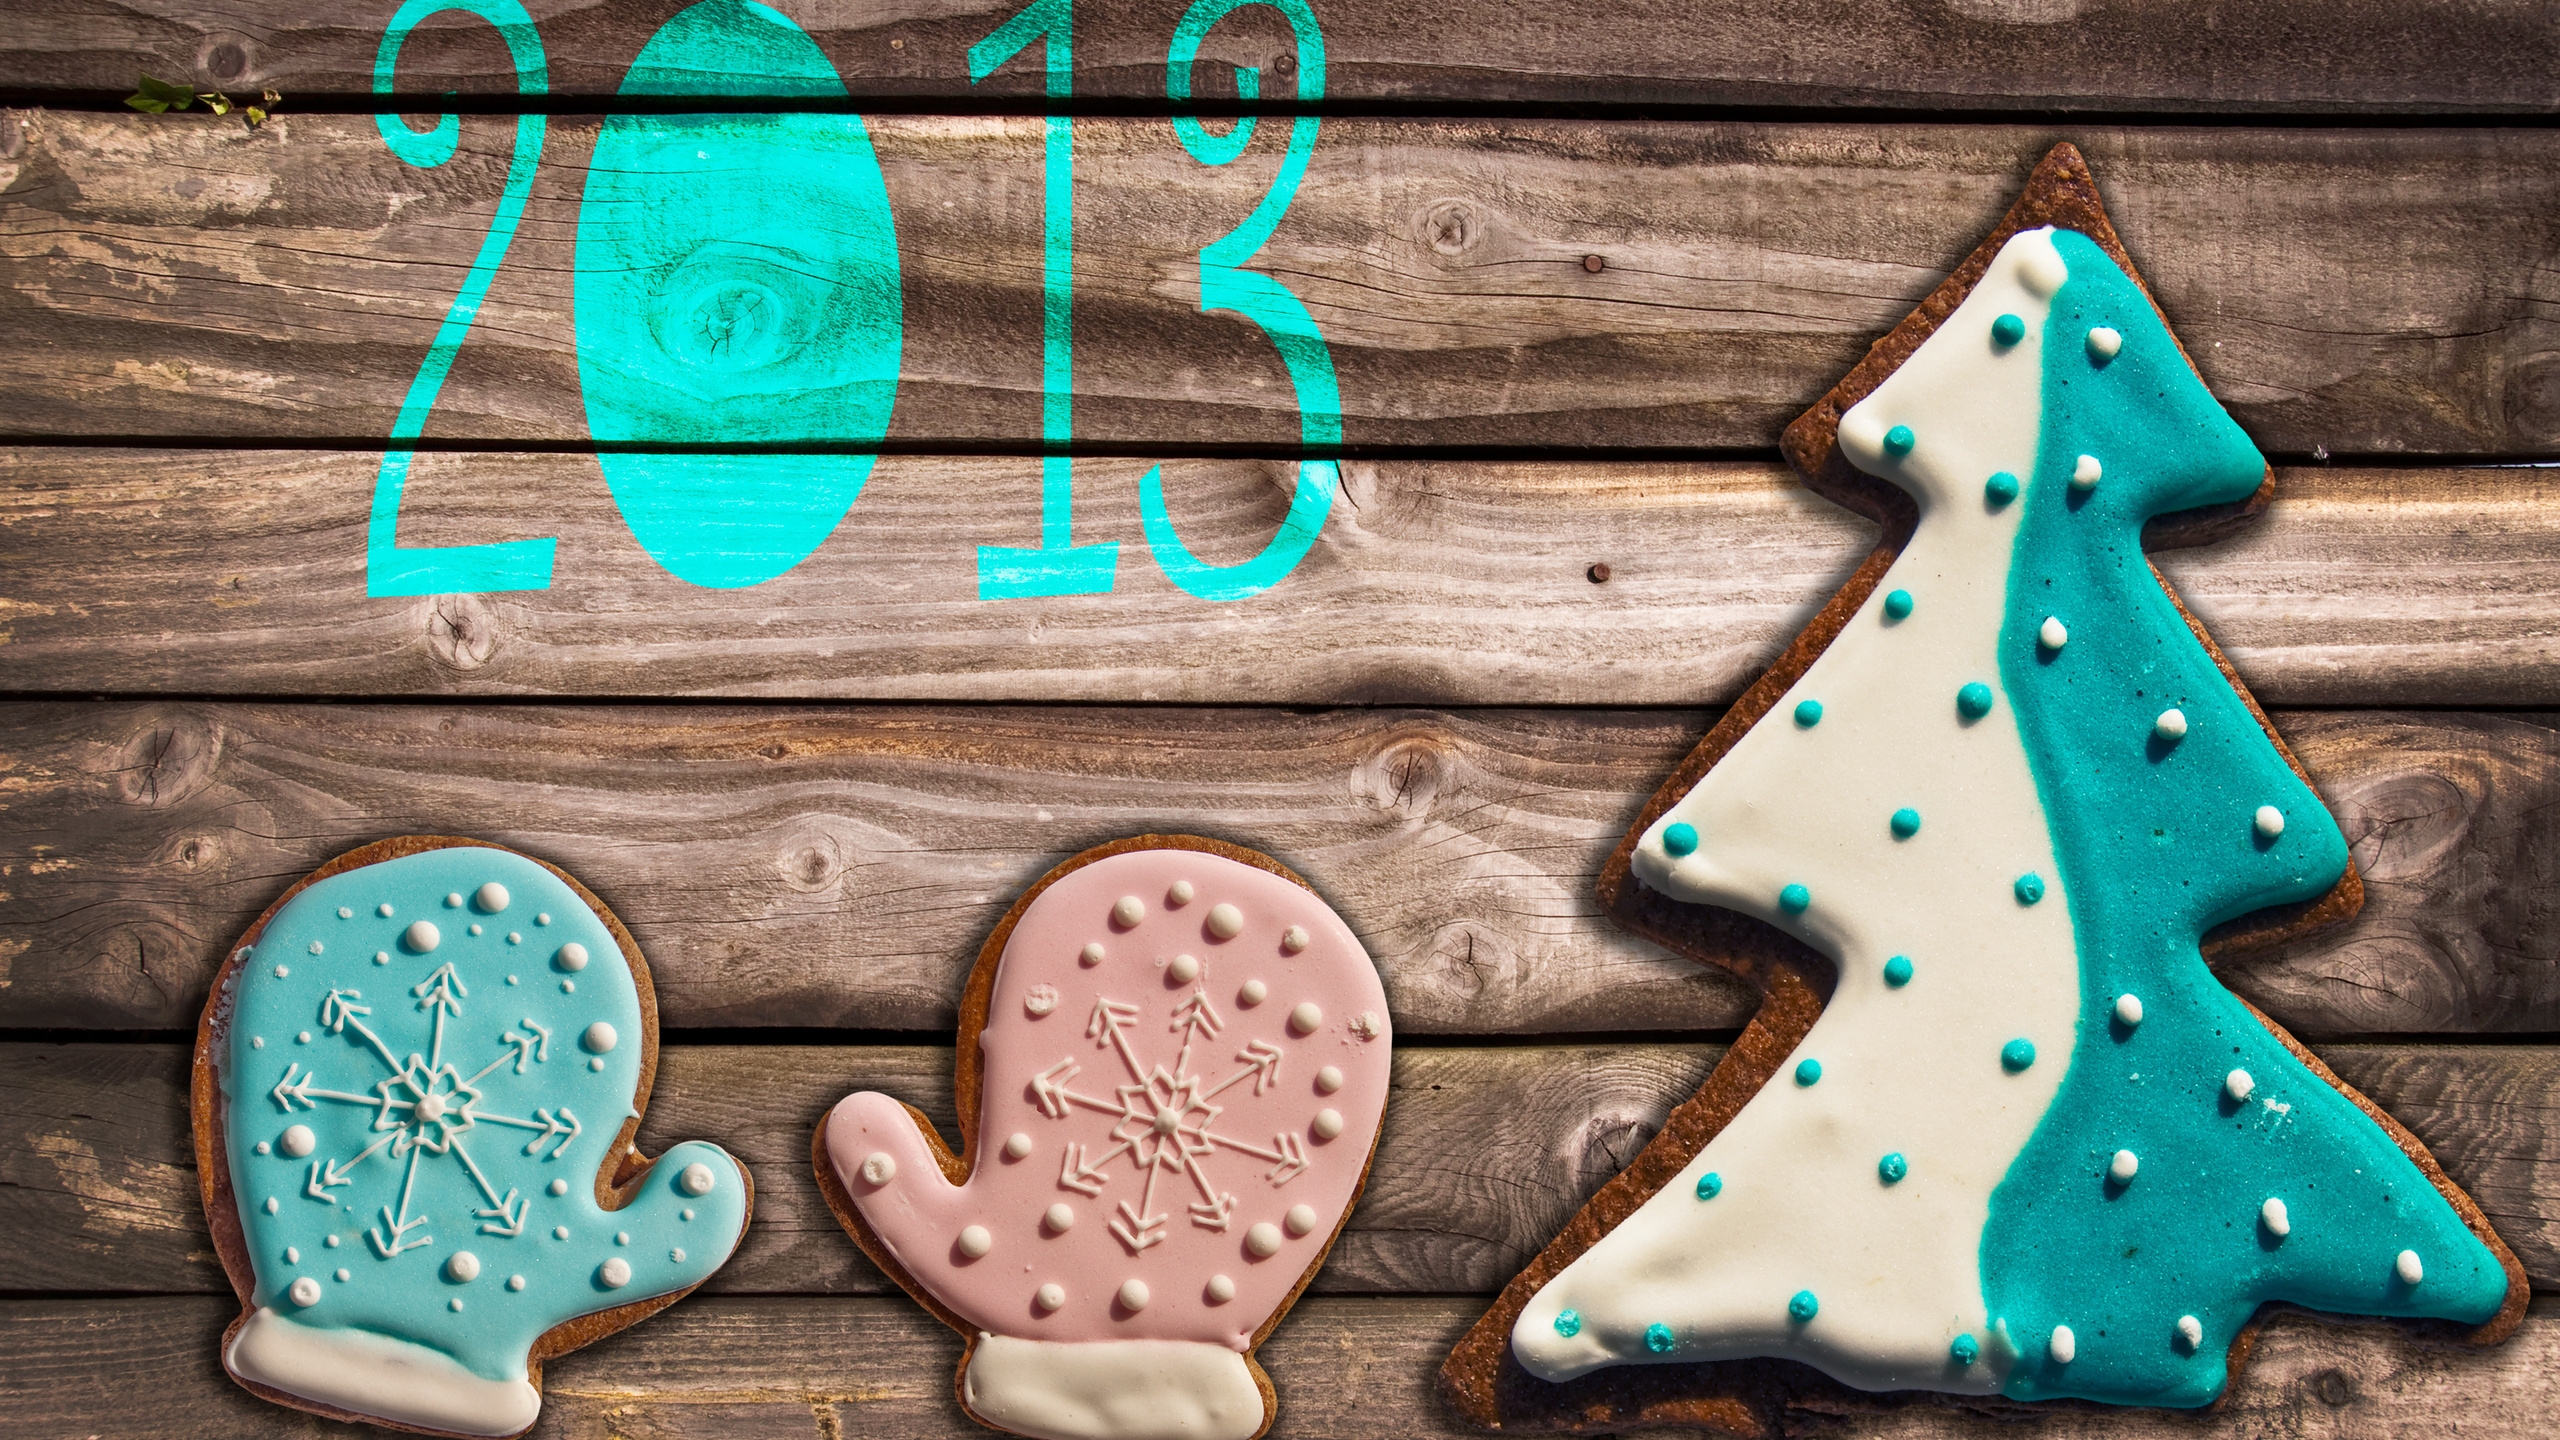 Gingerbread Ornaments for 2560x1440 HDTV resolution